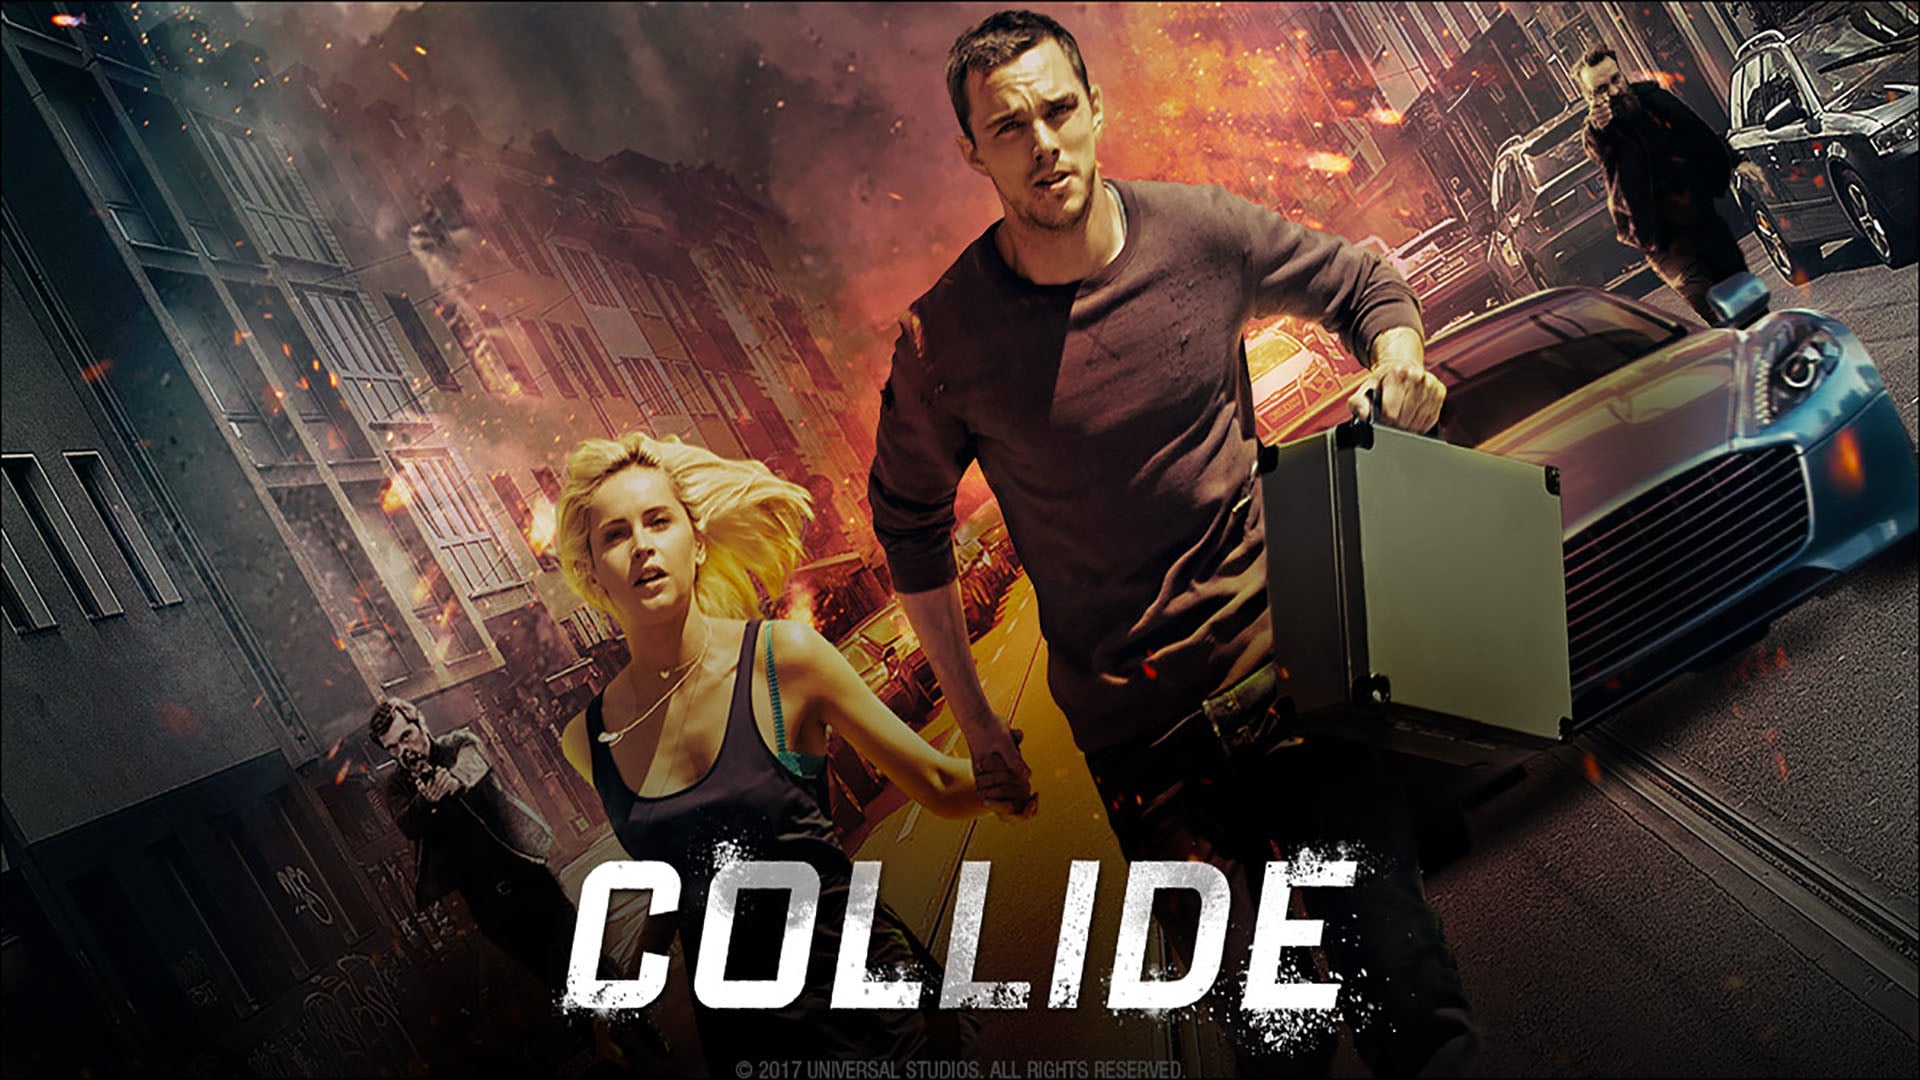 Collide 2 - for reel